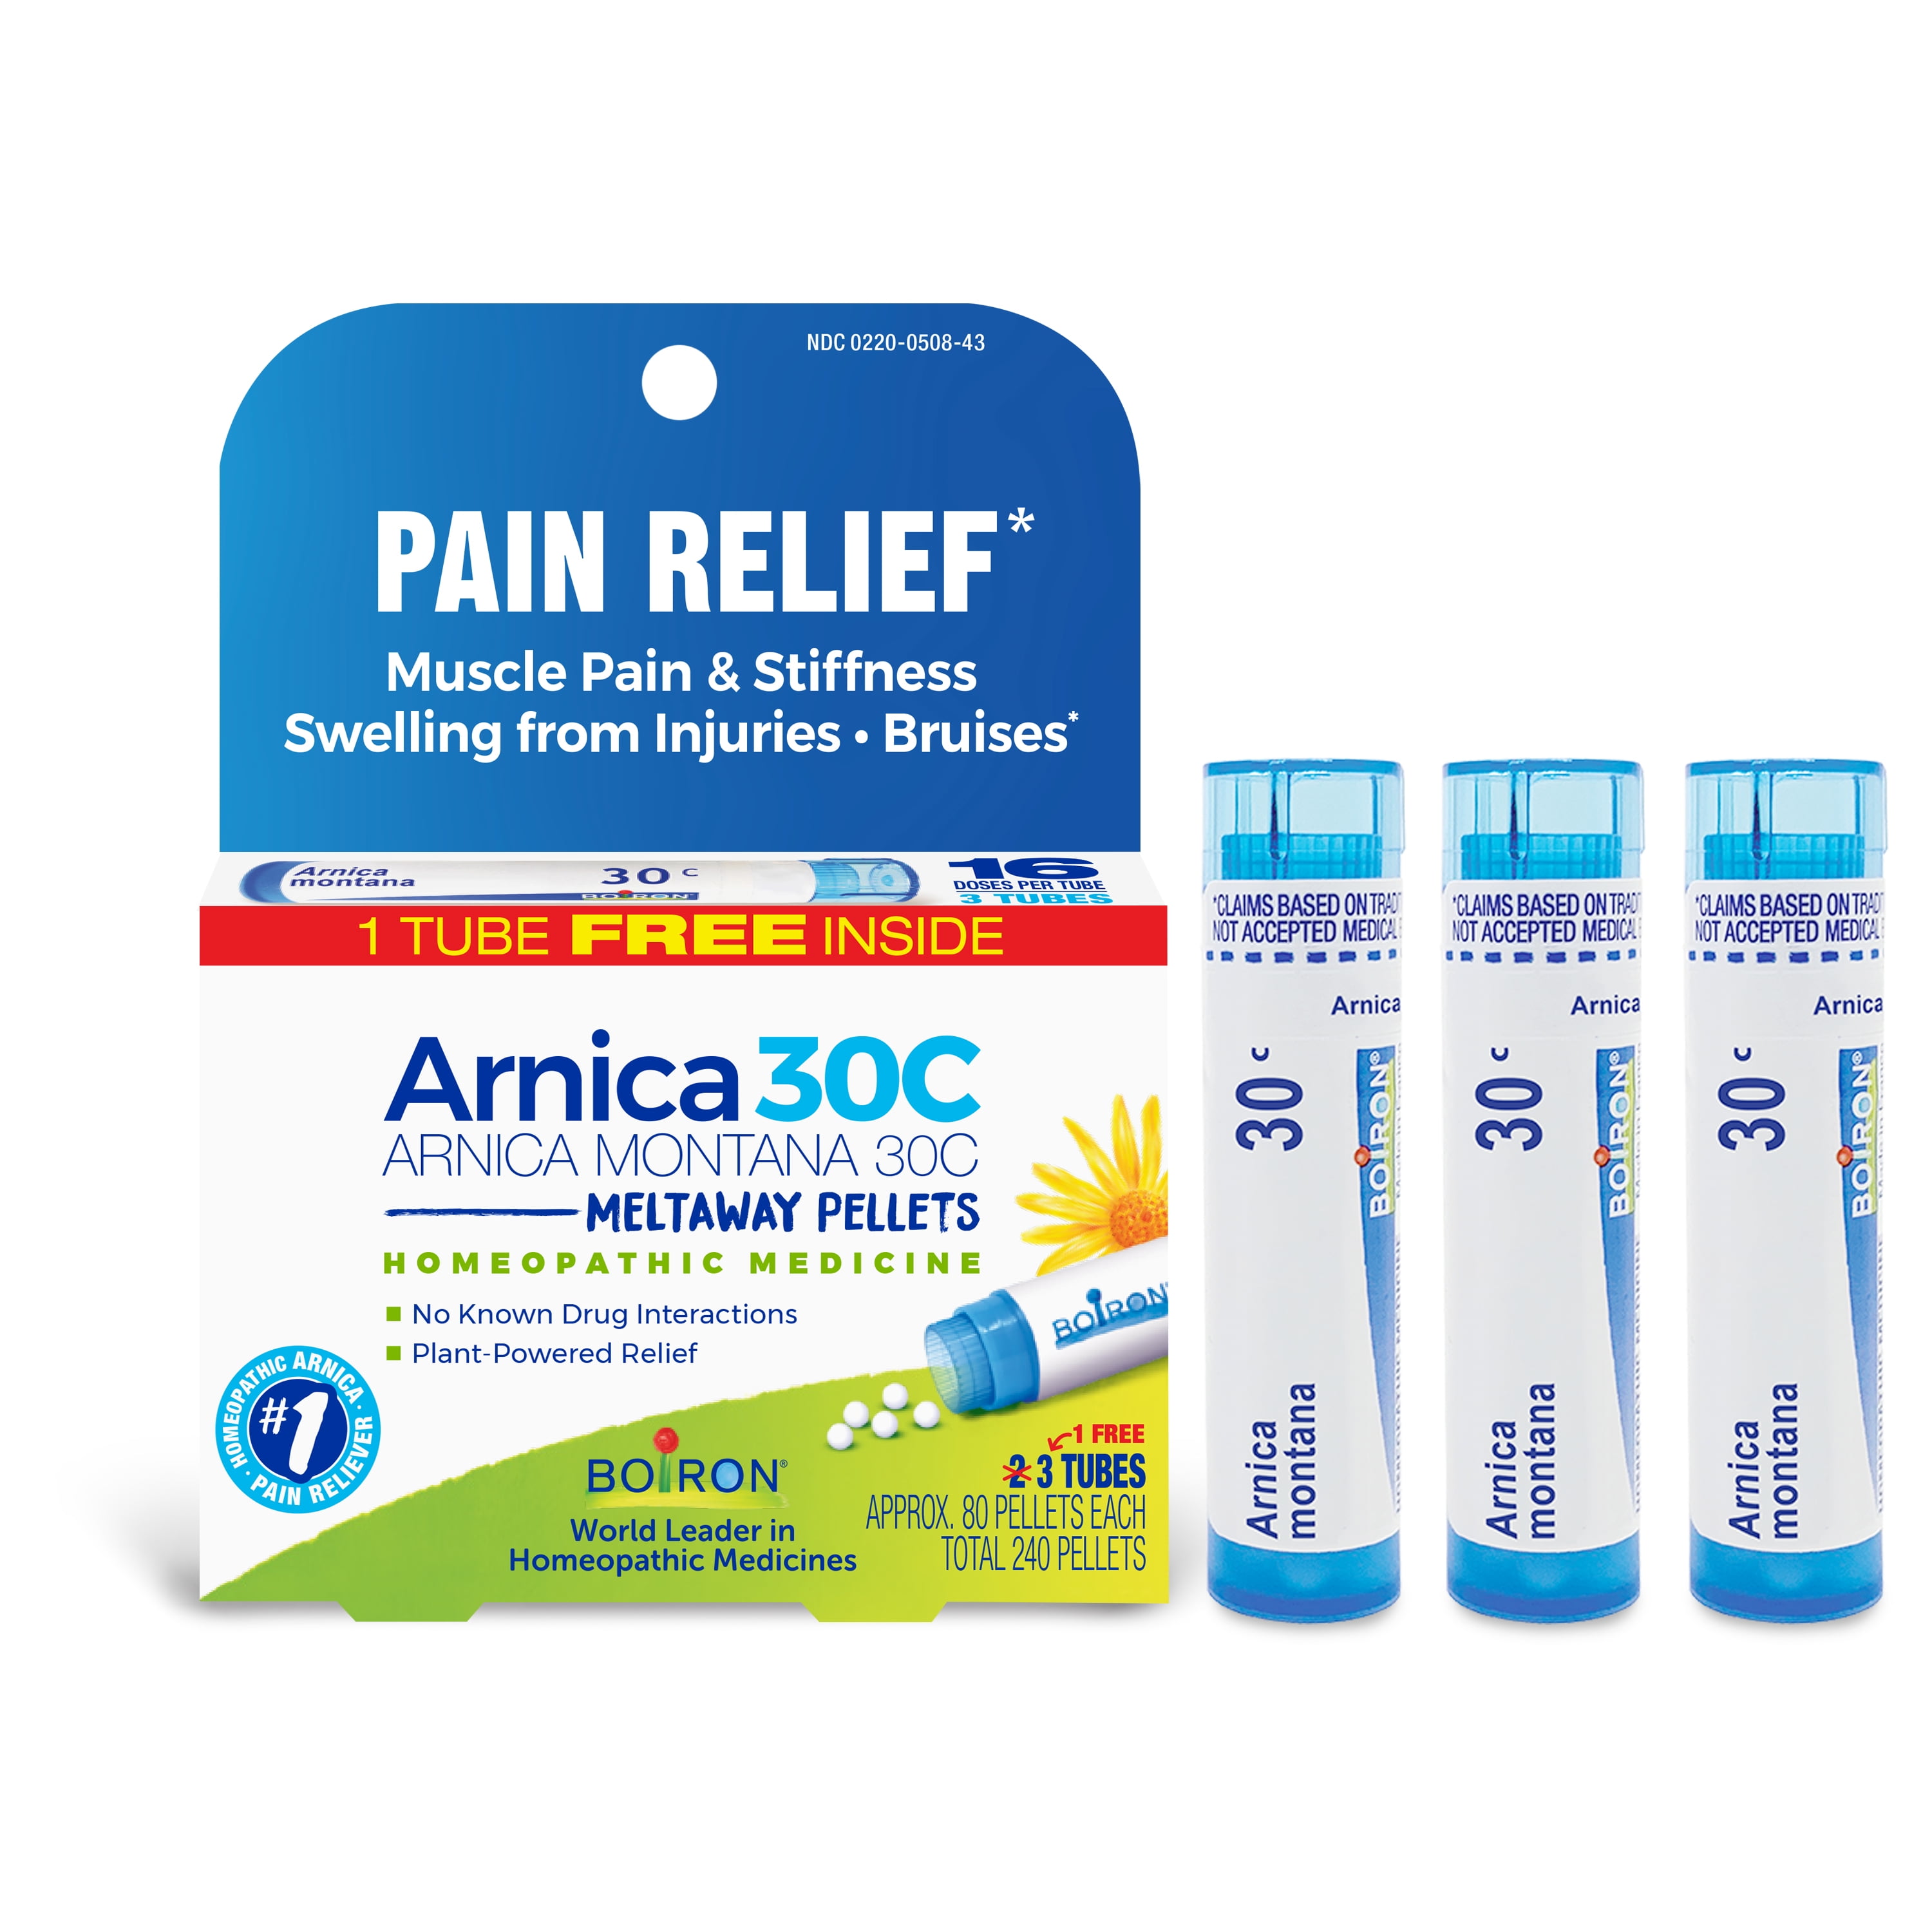 Boiron Arnica Montana 30c Bonus Pack Homeopathic Medicine For Pain Relief Muscle Pain Stiffness Swelling From Injuries Bruises 240 Pellets Walmart Com